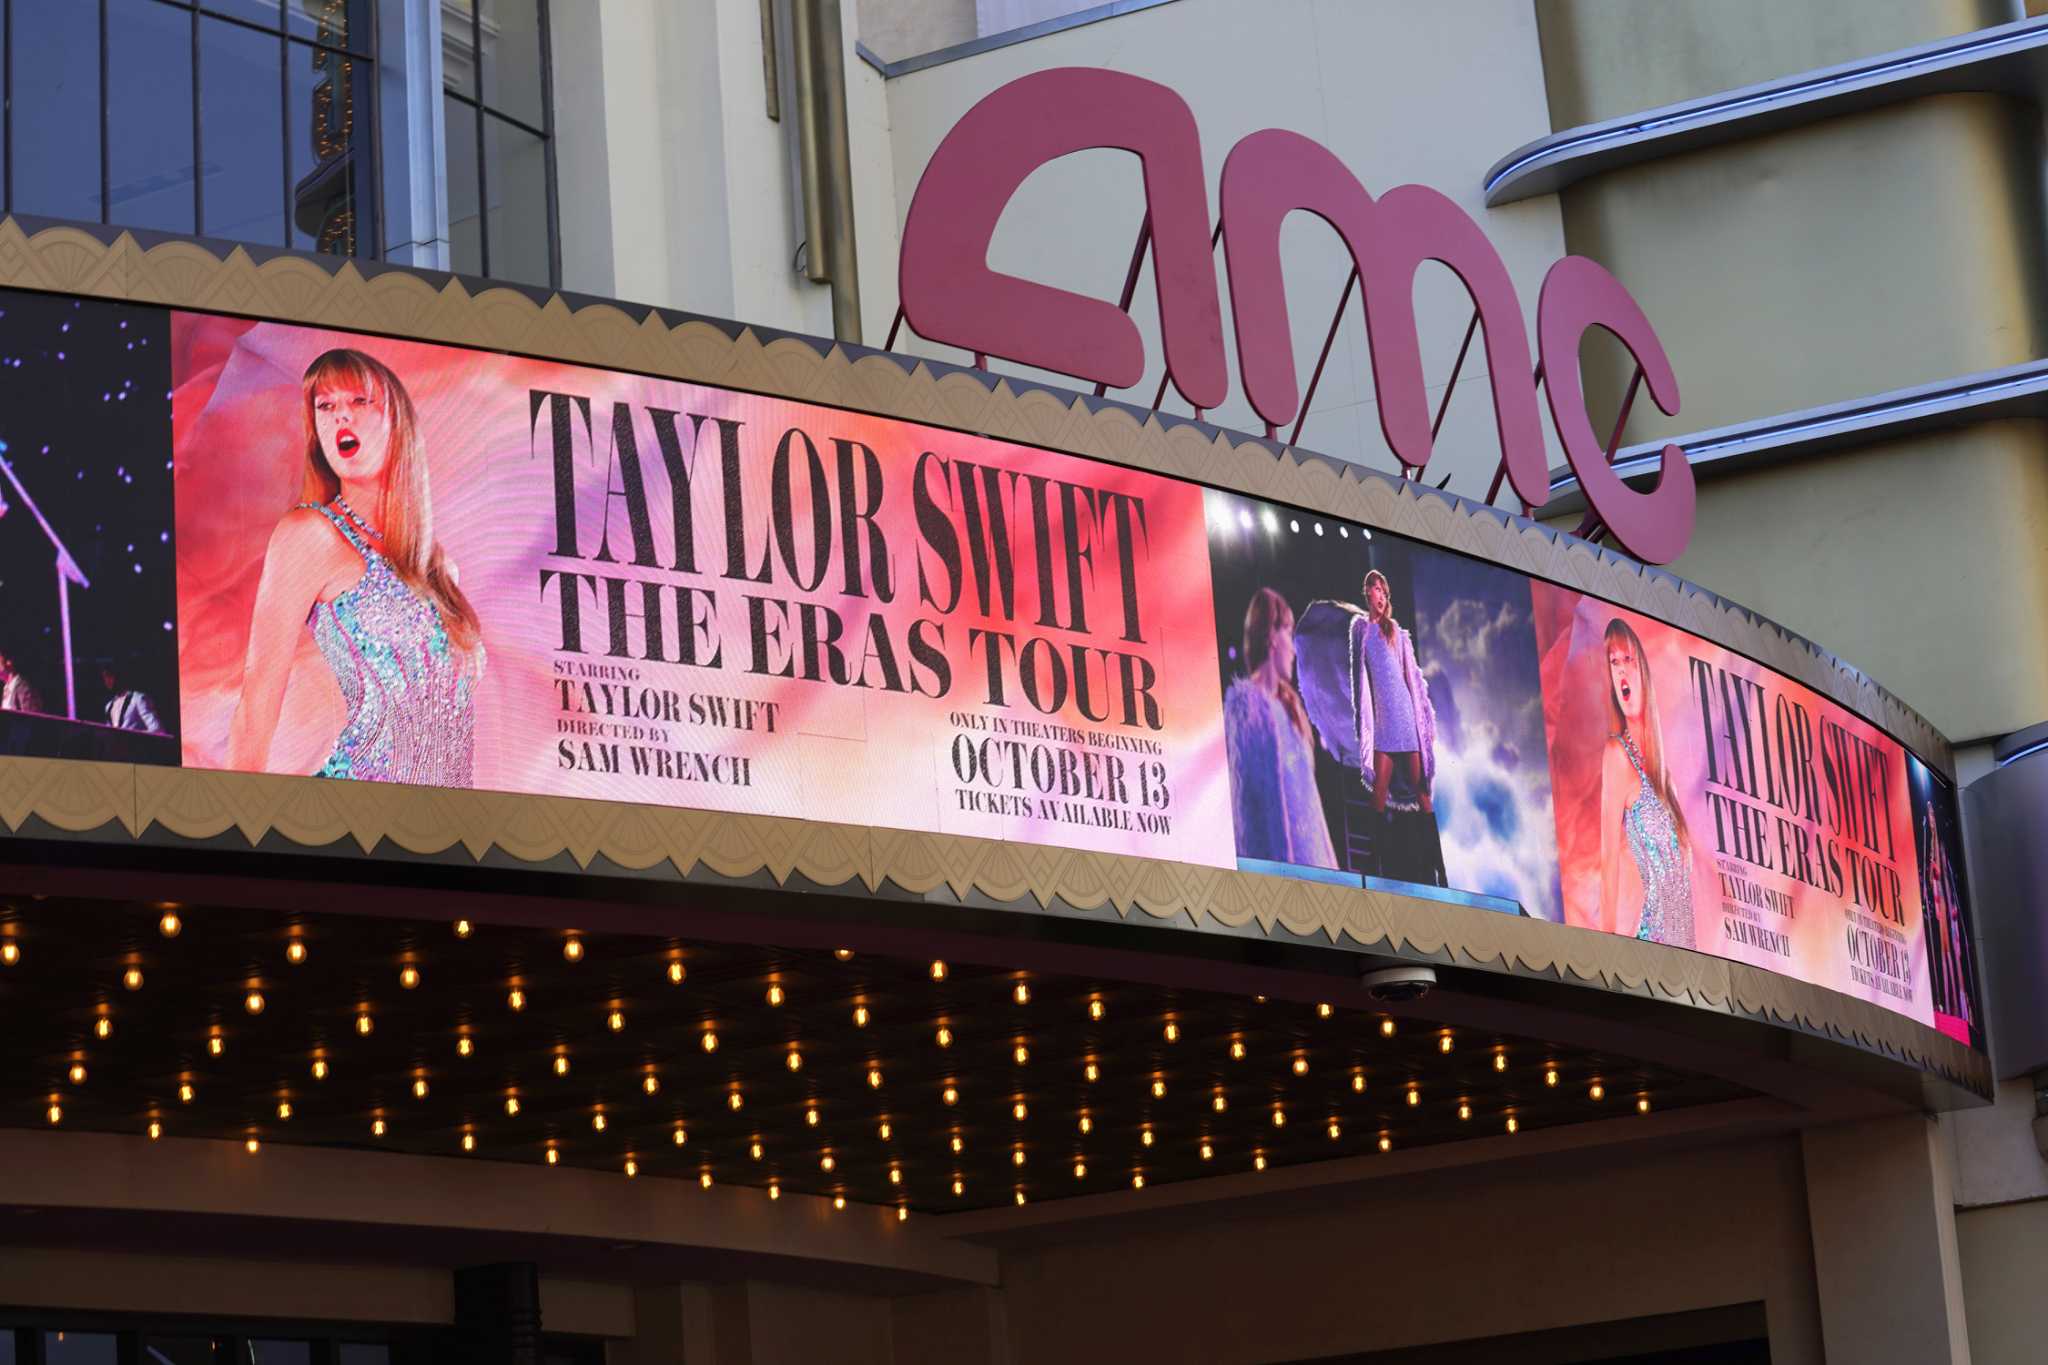 Taylor Swift: The Eras Tour' is a hit. But it could have been more